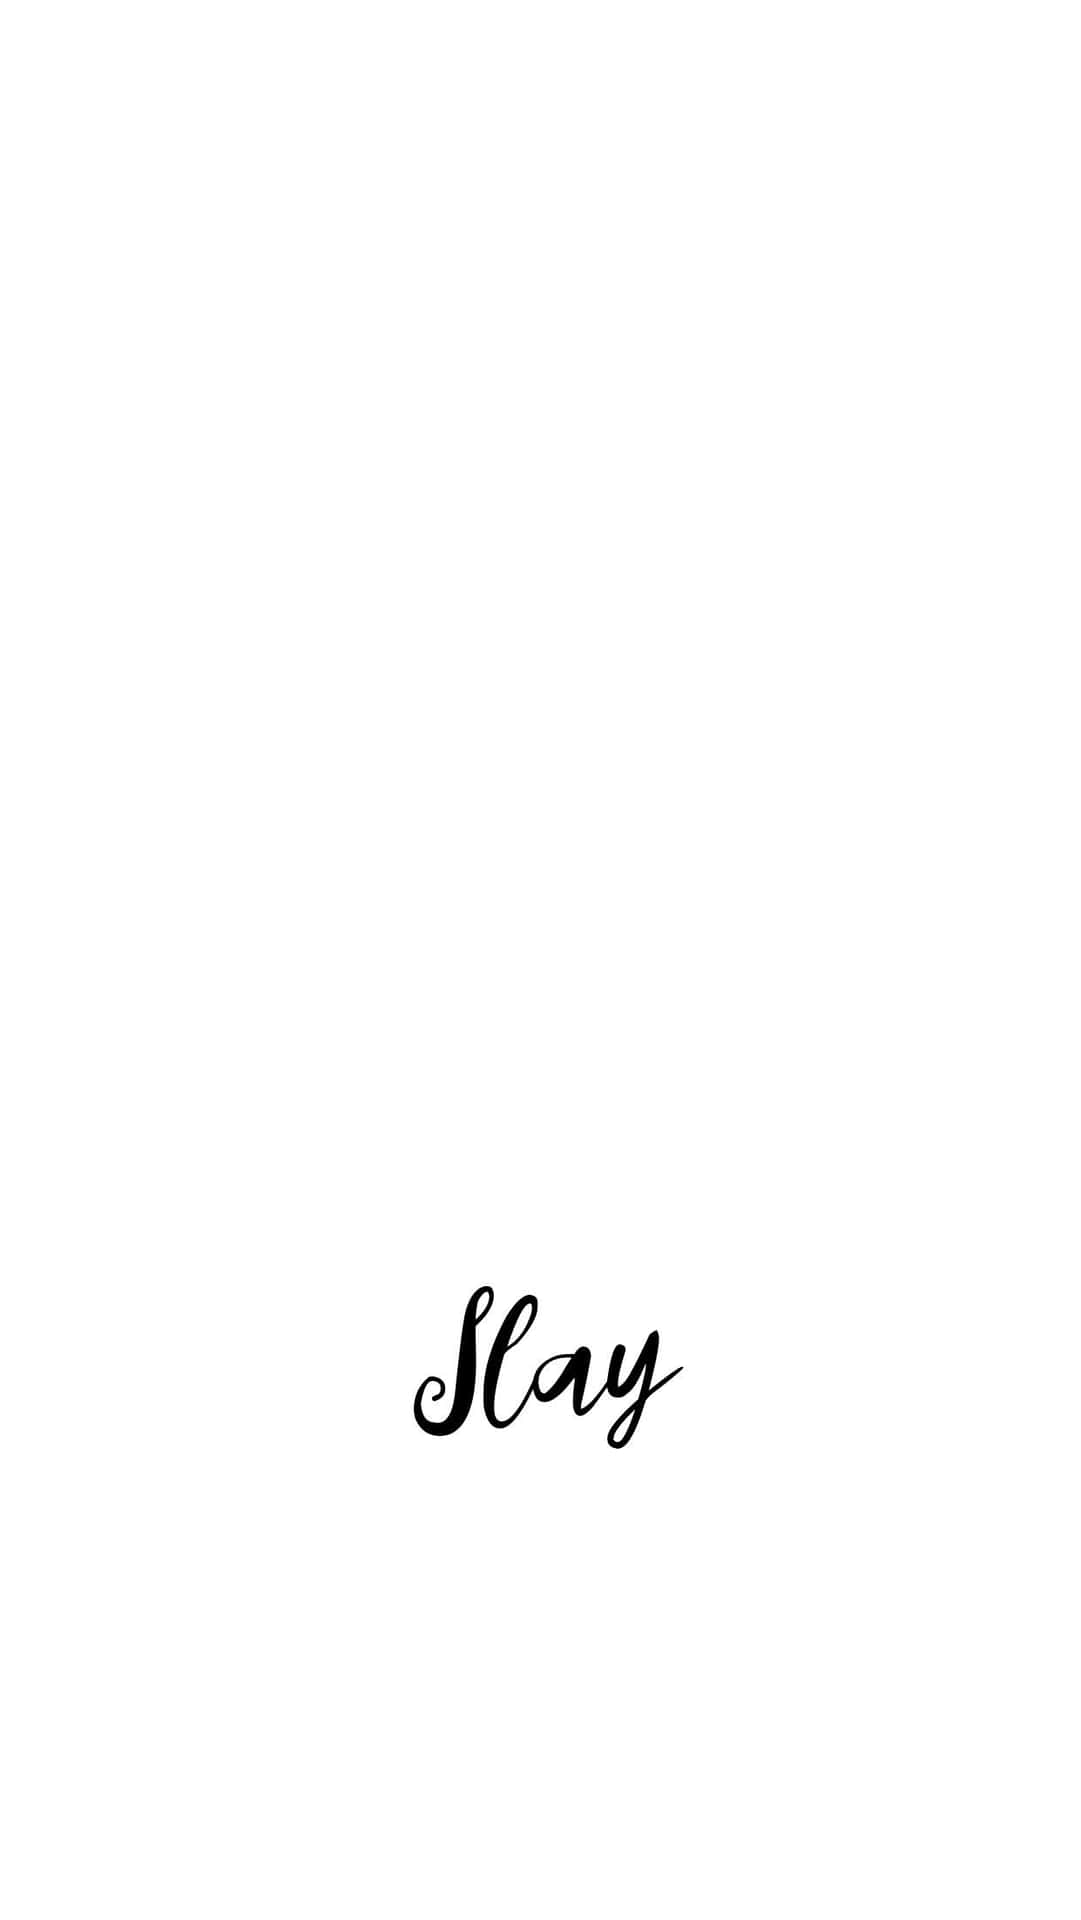 A Black And White Image Of The Word Slay Background